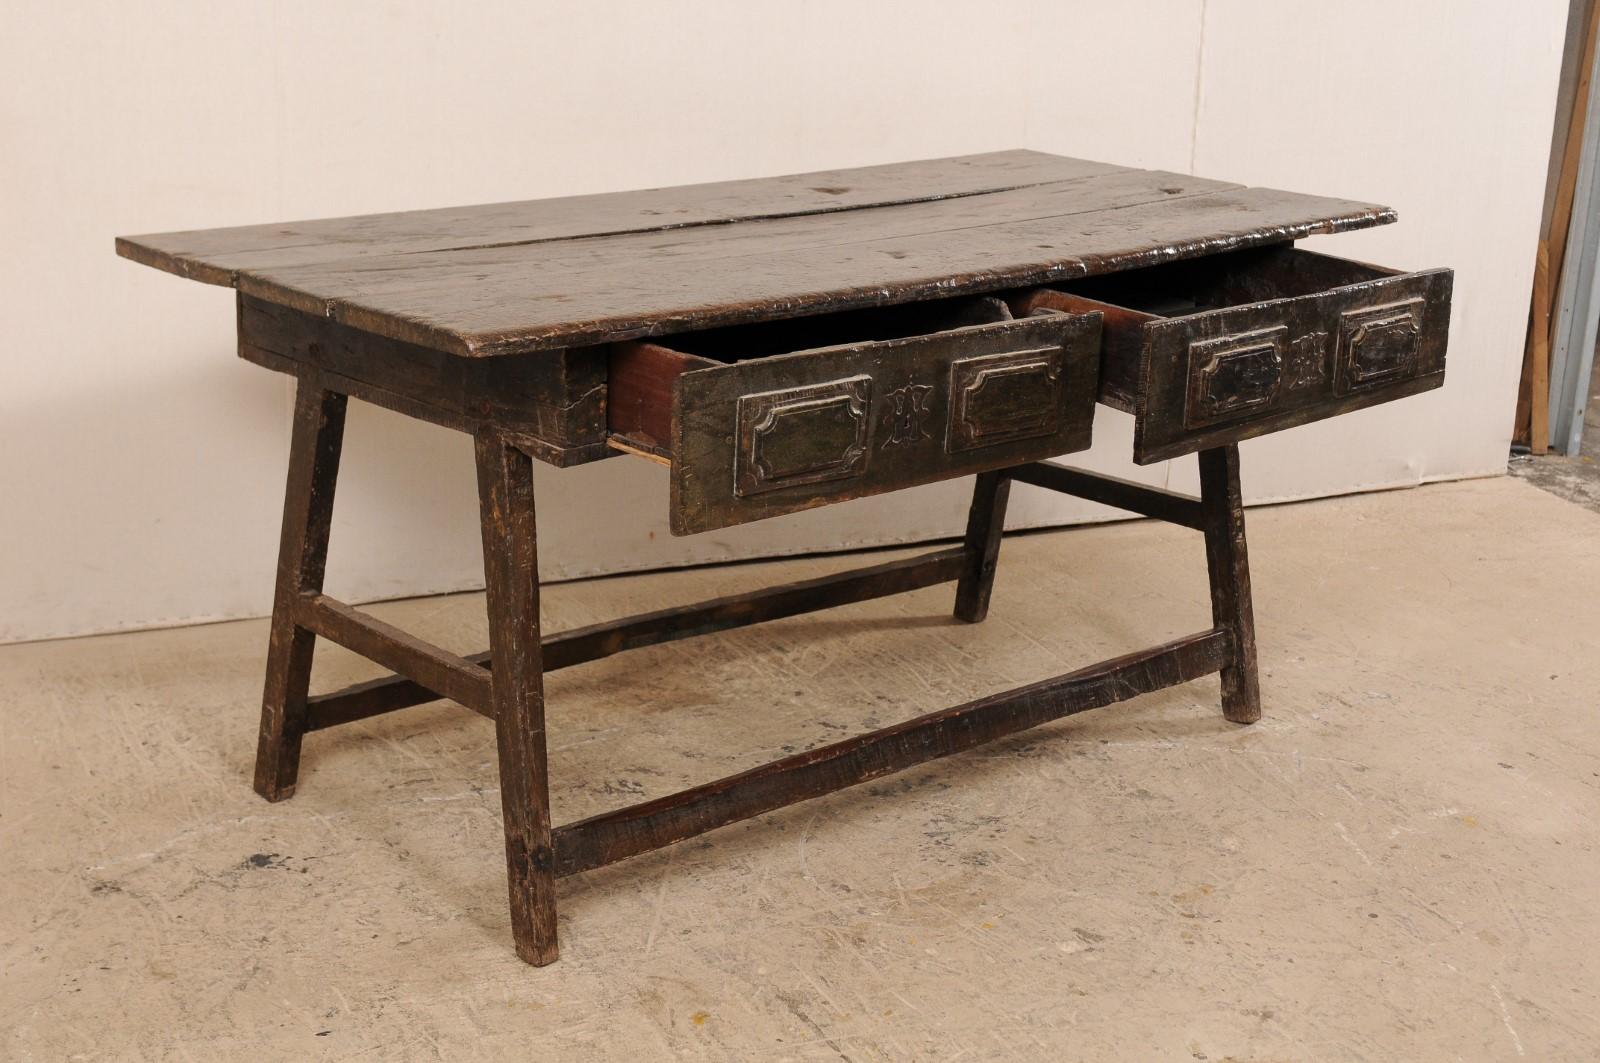 Carved Late 17th C. Brazilian Peroba Wood Console Table w/Drawers & Sawhorse Style Legs For Sale